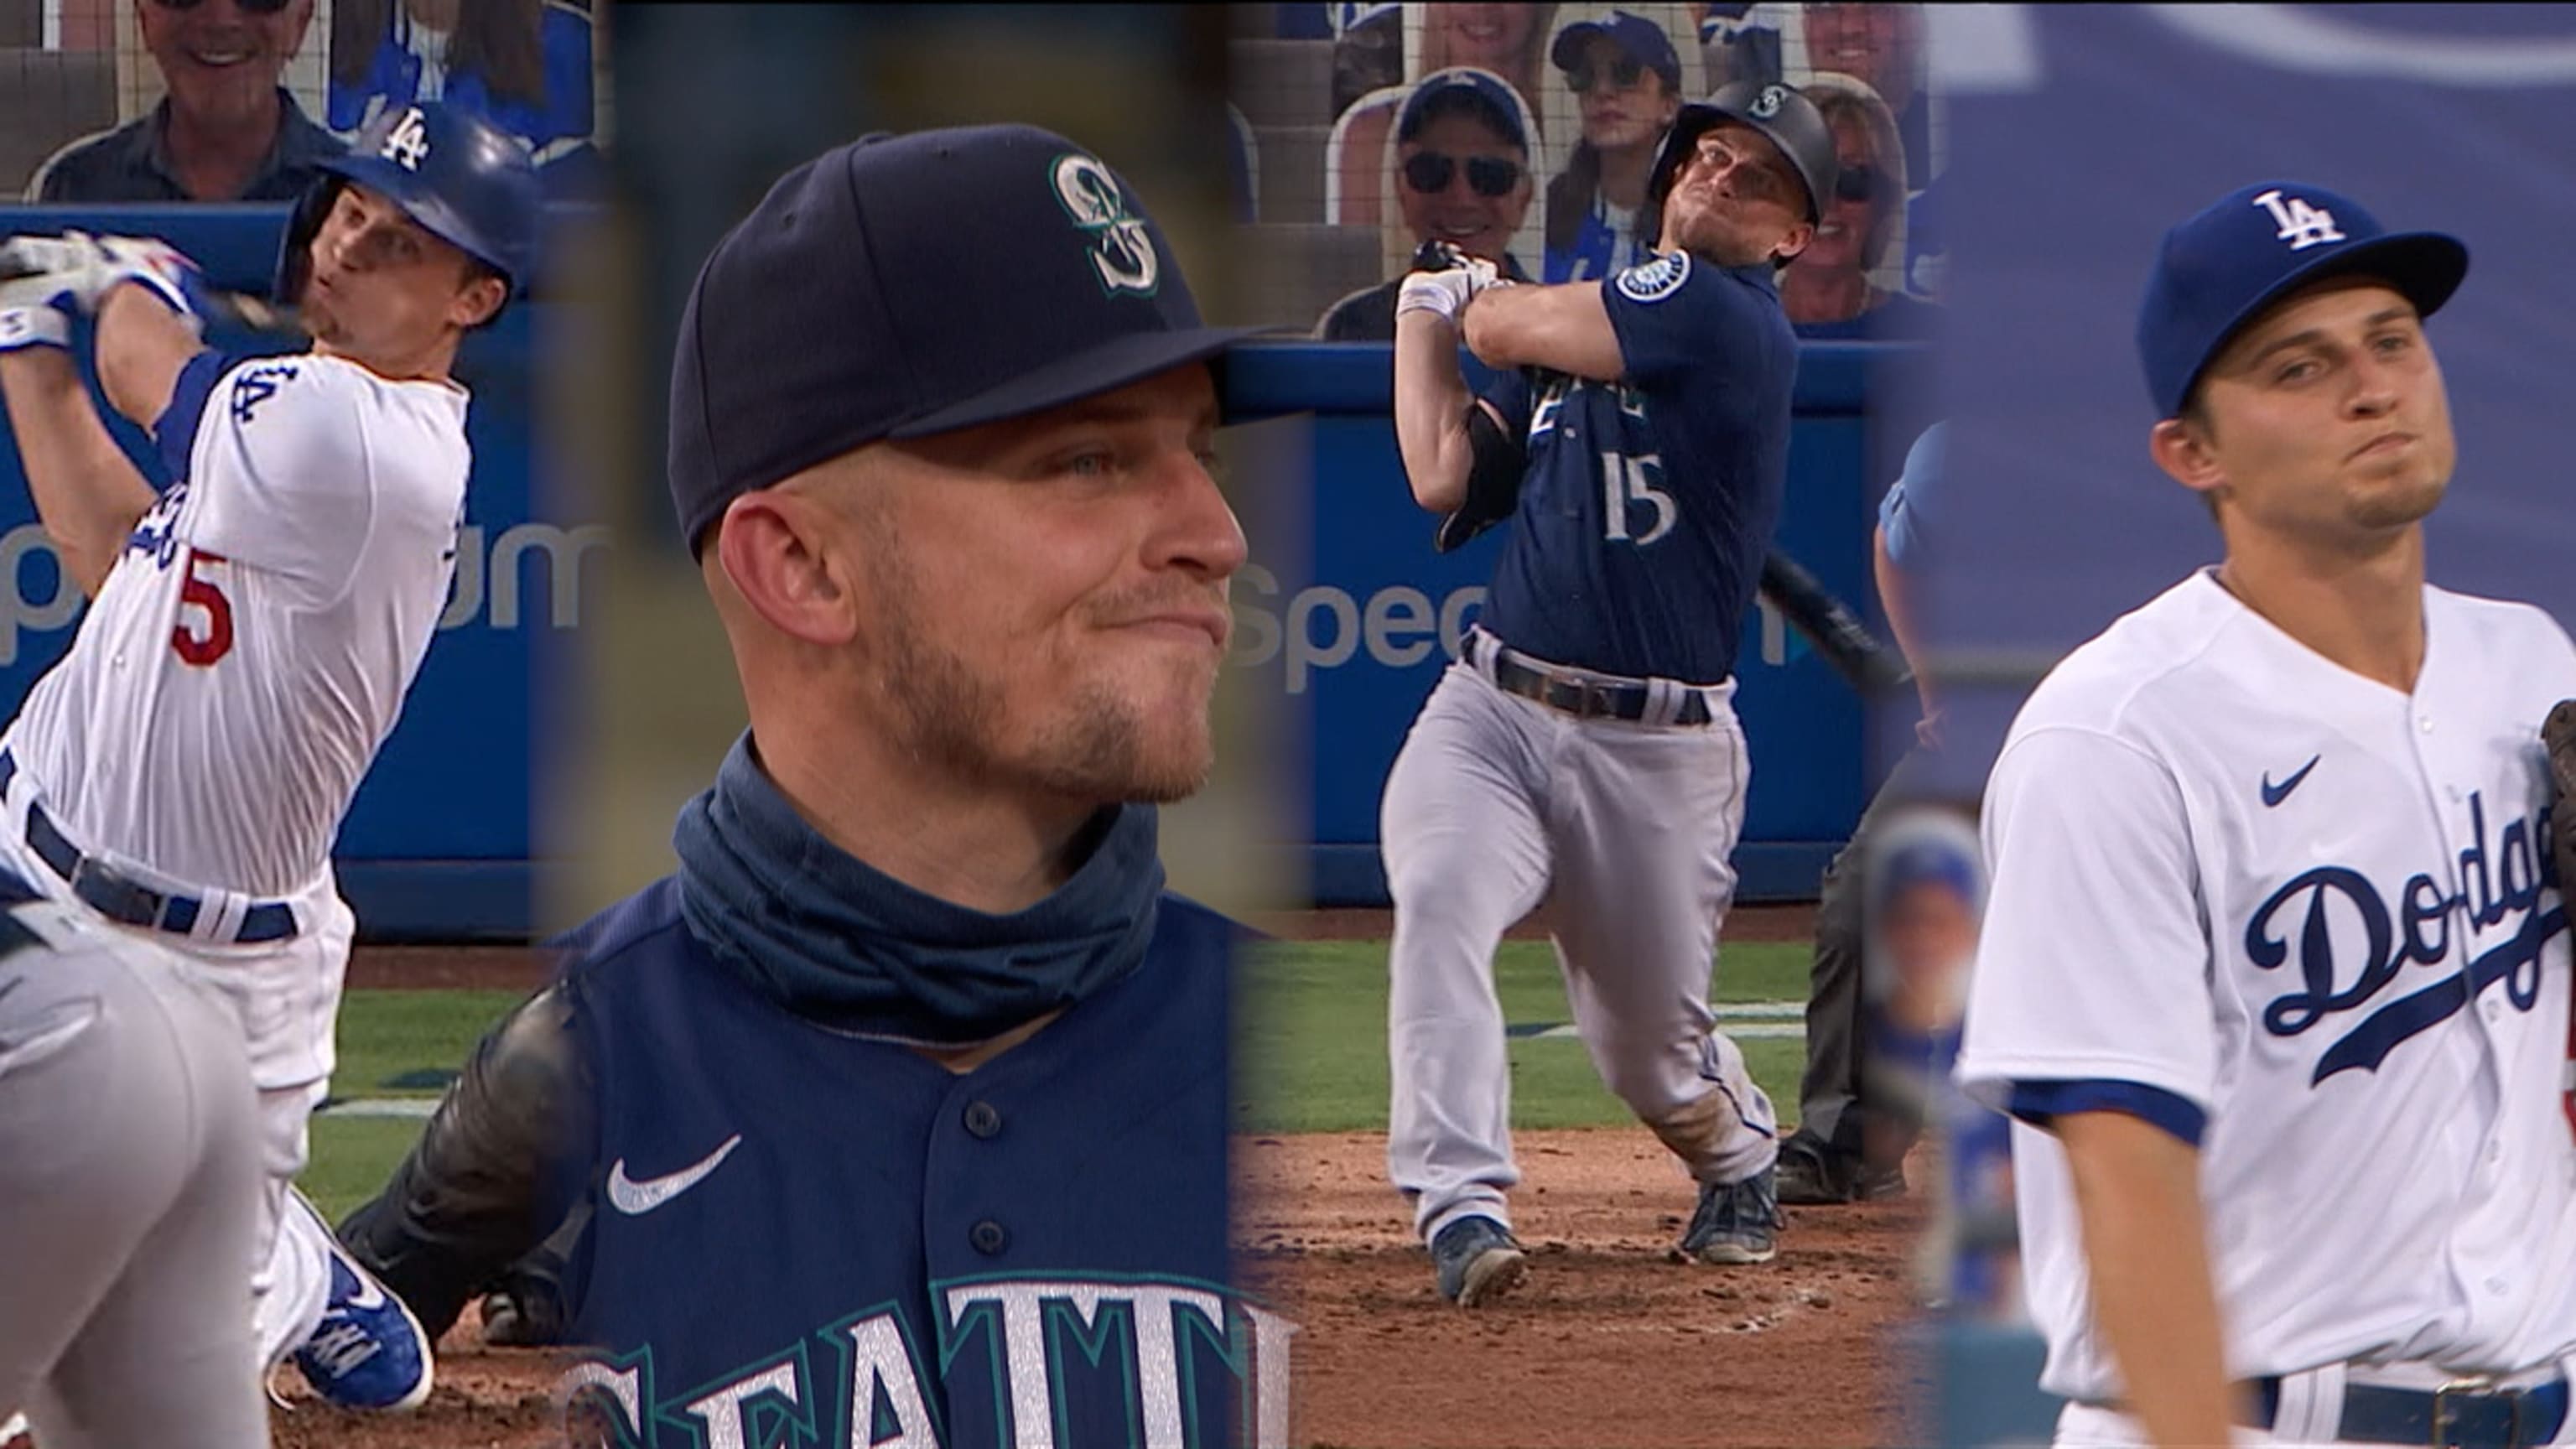 Kyle Seager homers off Clayton Kershaw in loss